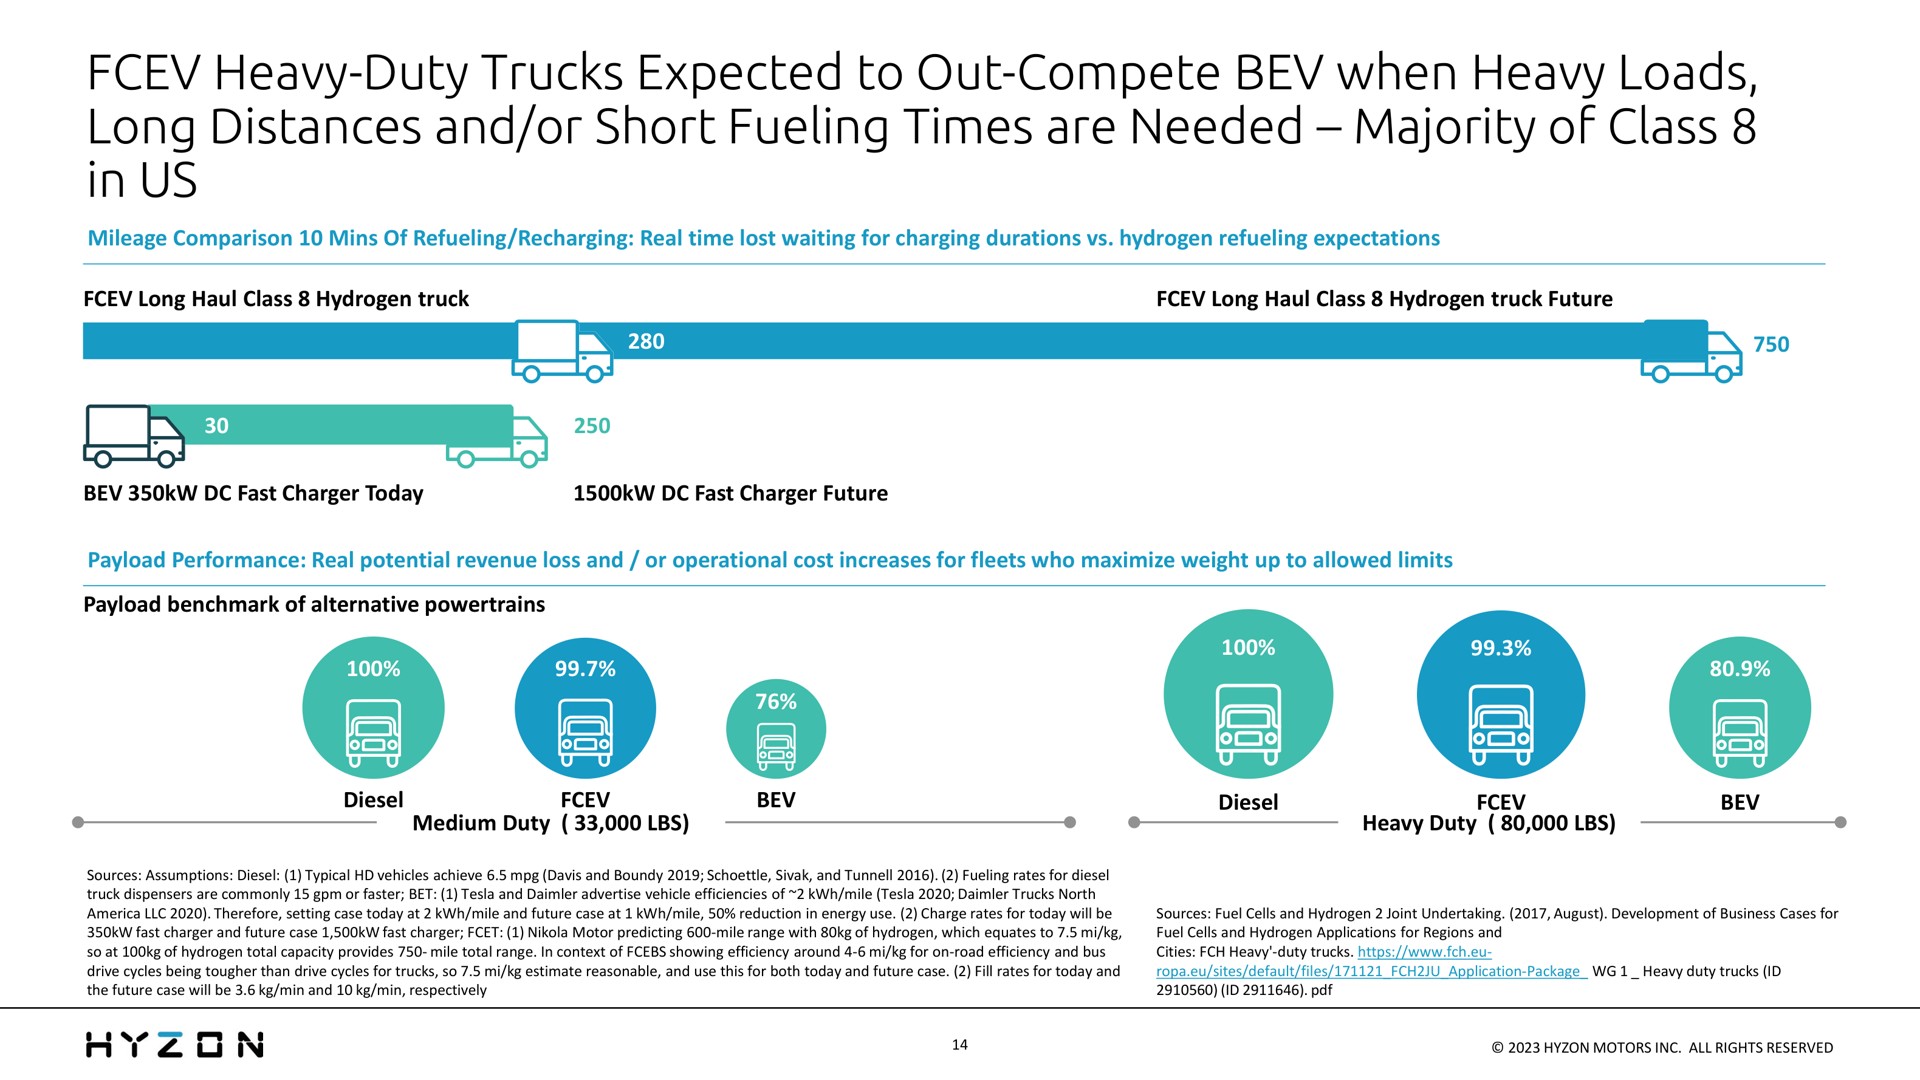 heavy duty trucks expected to out compete when heavy loads long distances and or short fueling times are needed majority of class in us | Hyzon